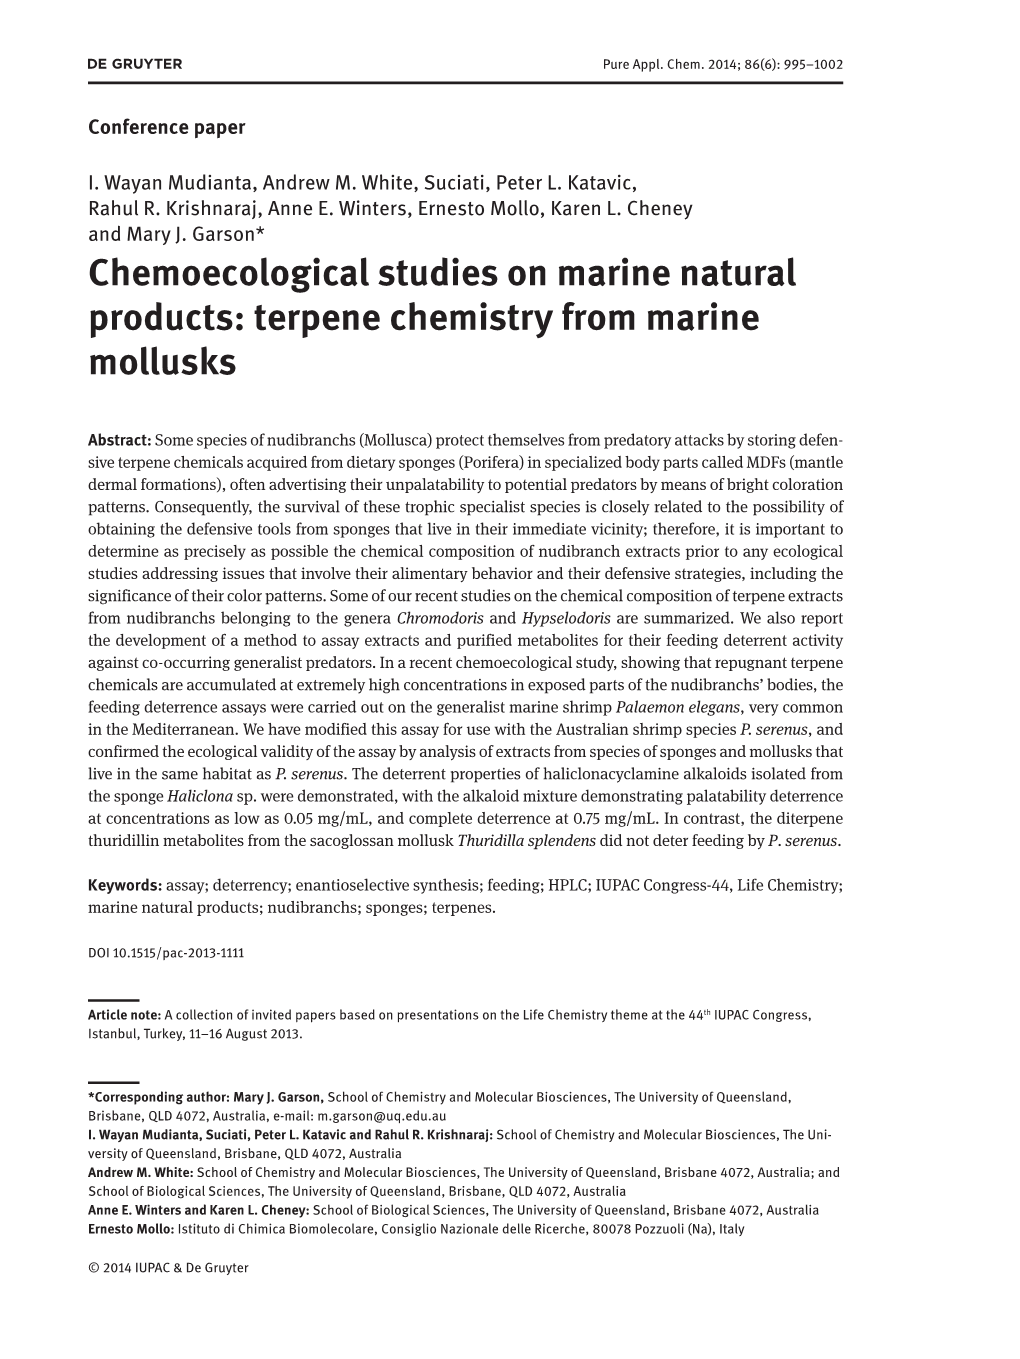 Chemoecological Studies on Marine Natural Products: Terpene Chemistry from Marine Mollusks